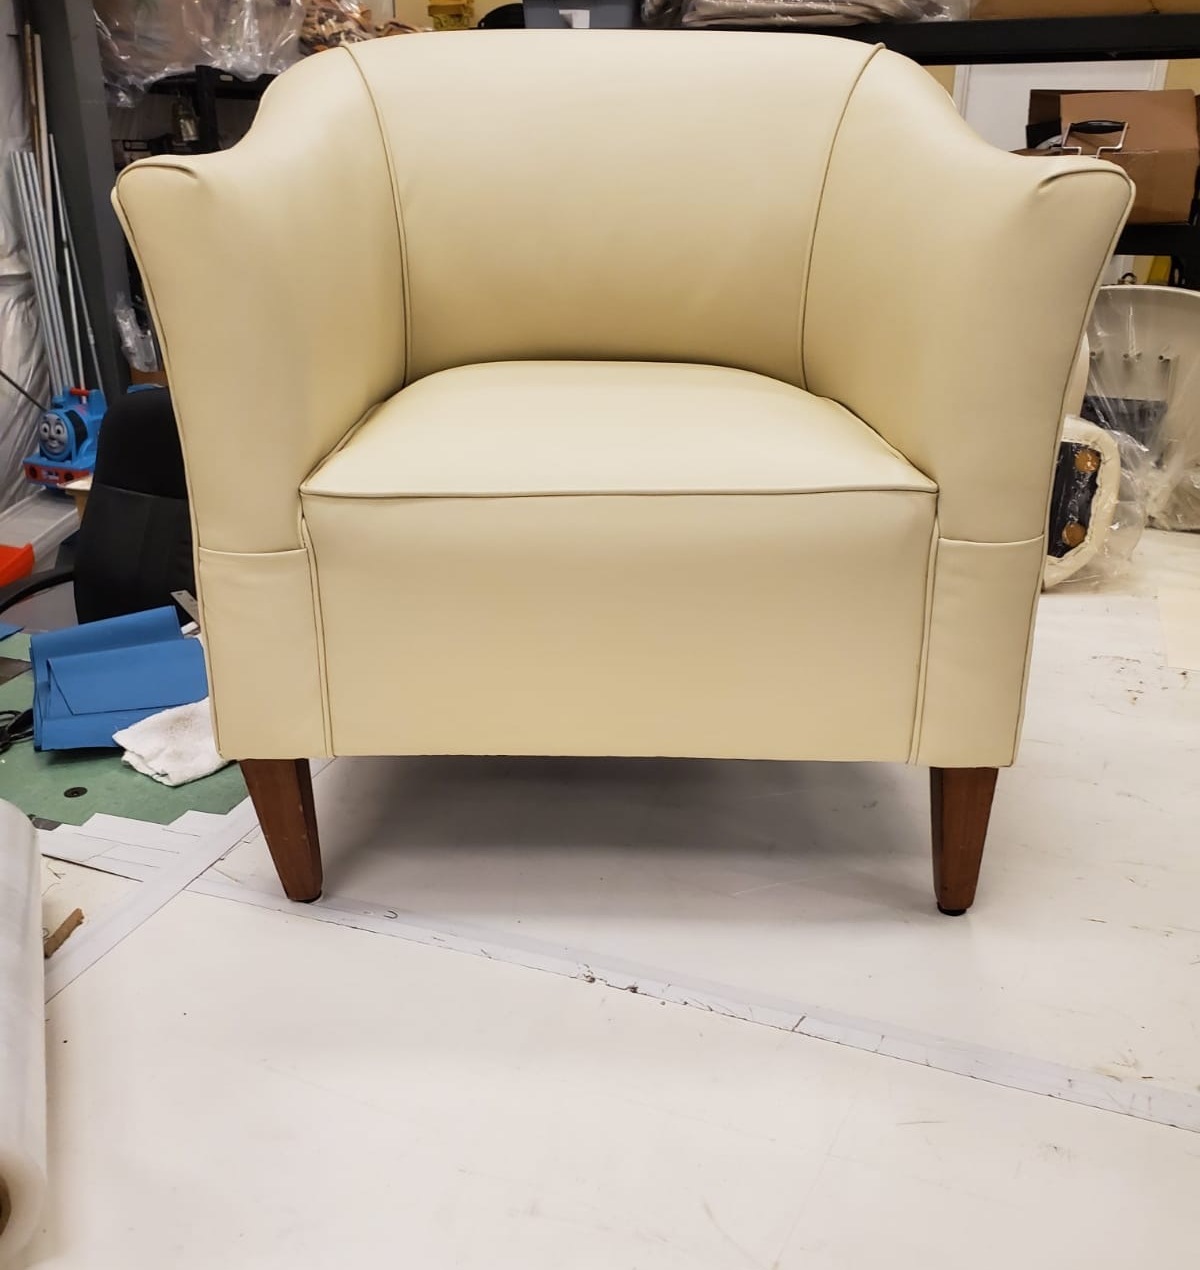 Chair Upholstery from Naples Canvas and Upholstery